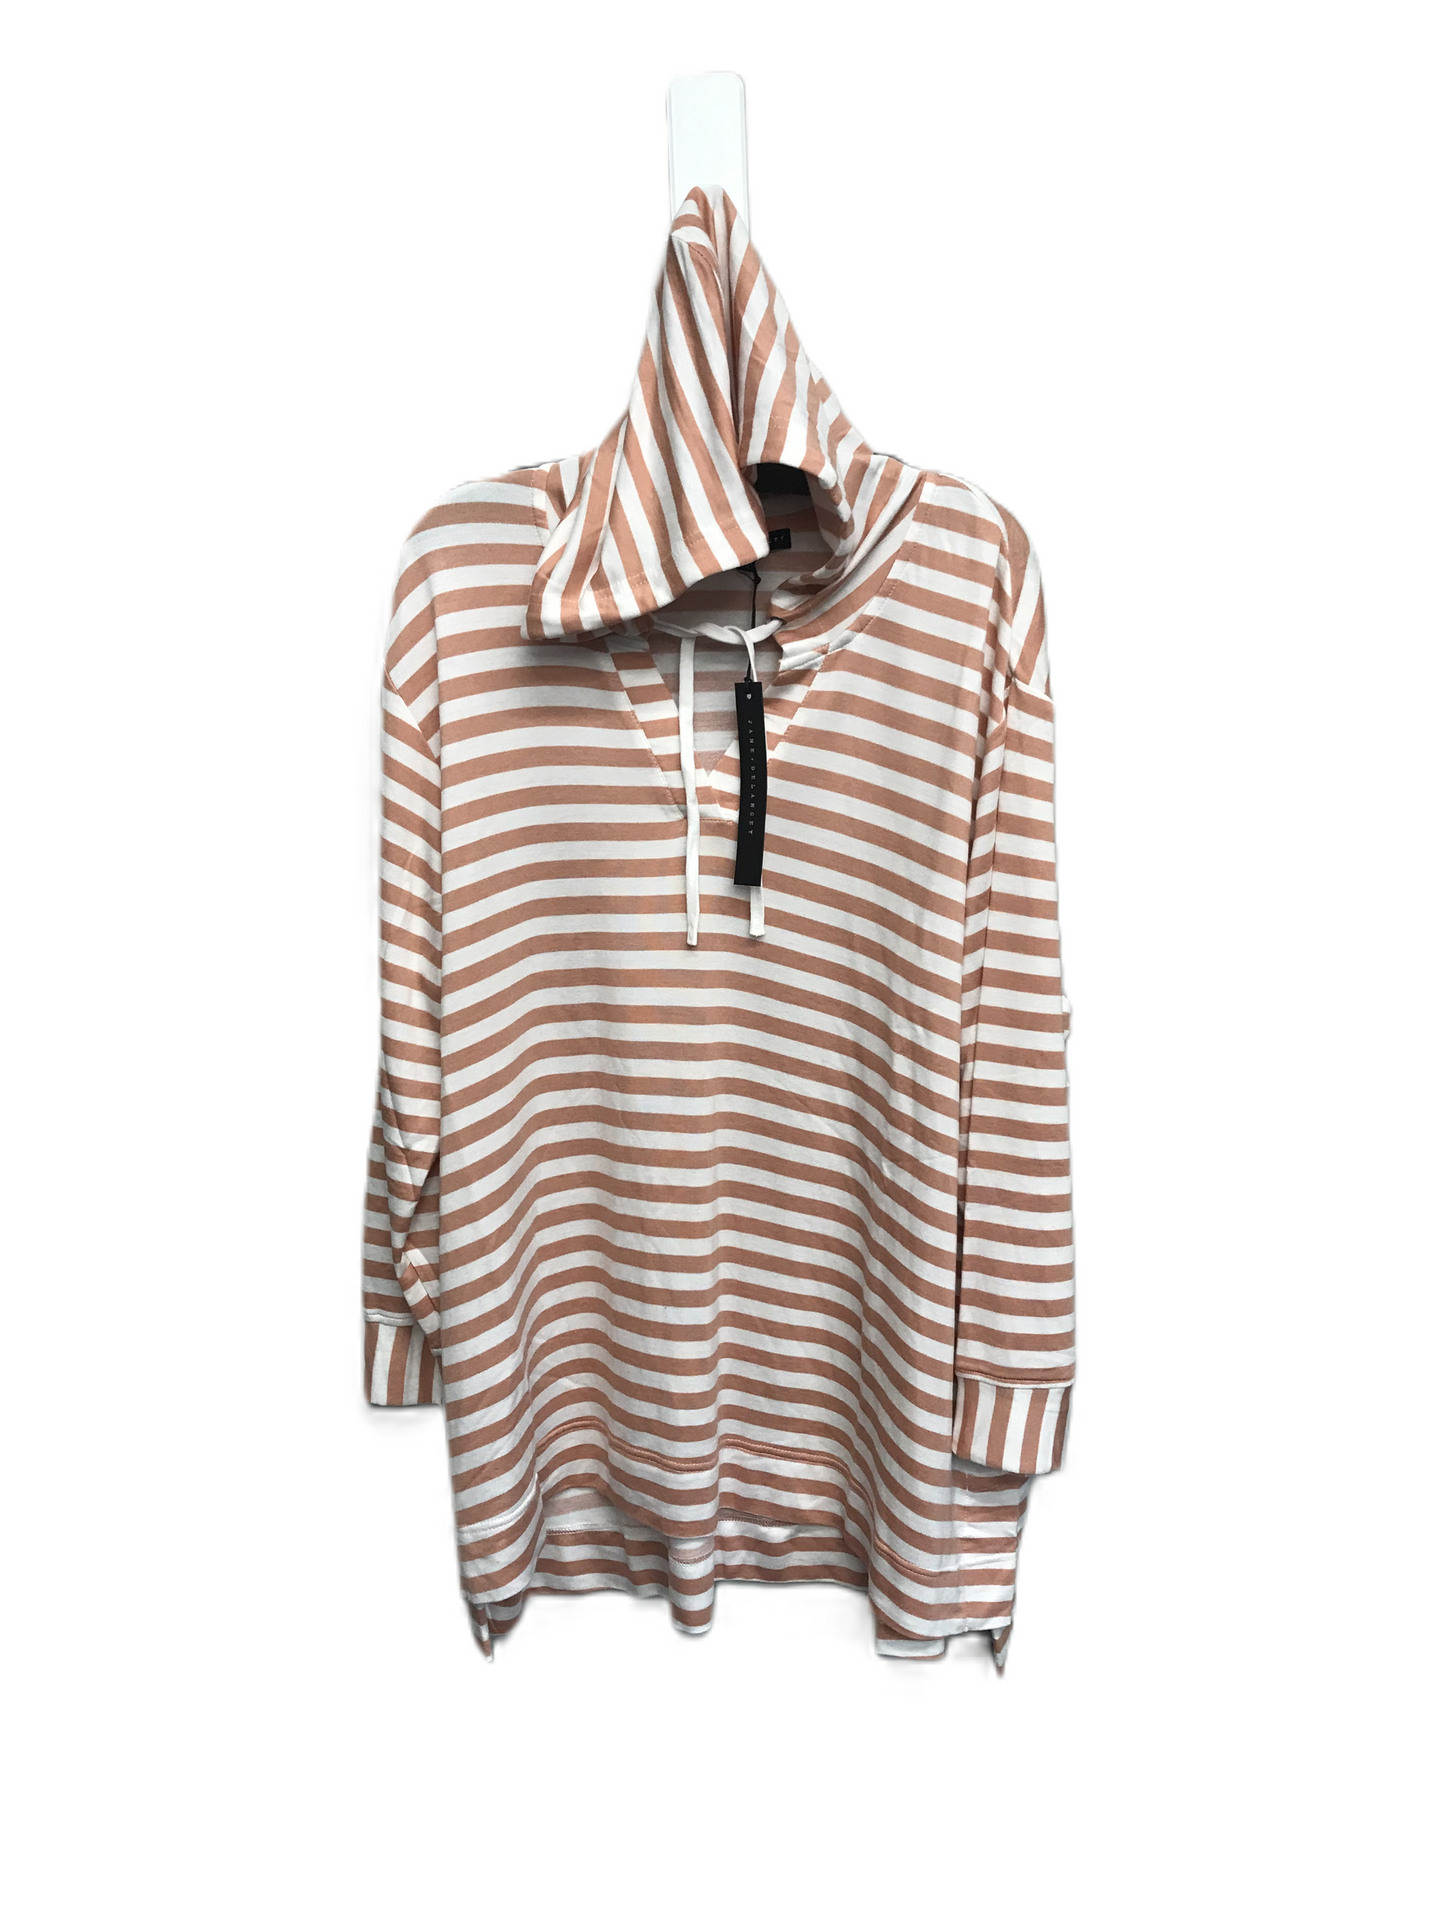 Striped Pattern Top Long Sleeve By Jane And Delancey, Size: 1x